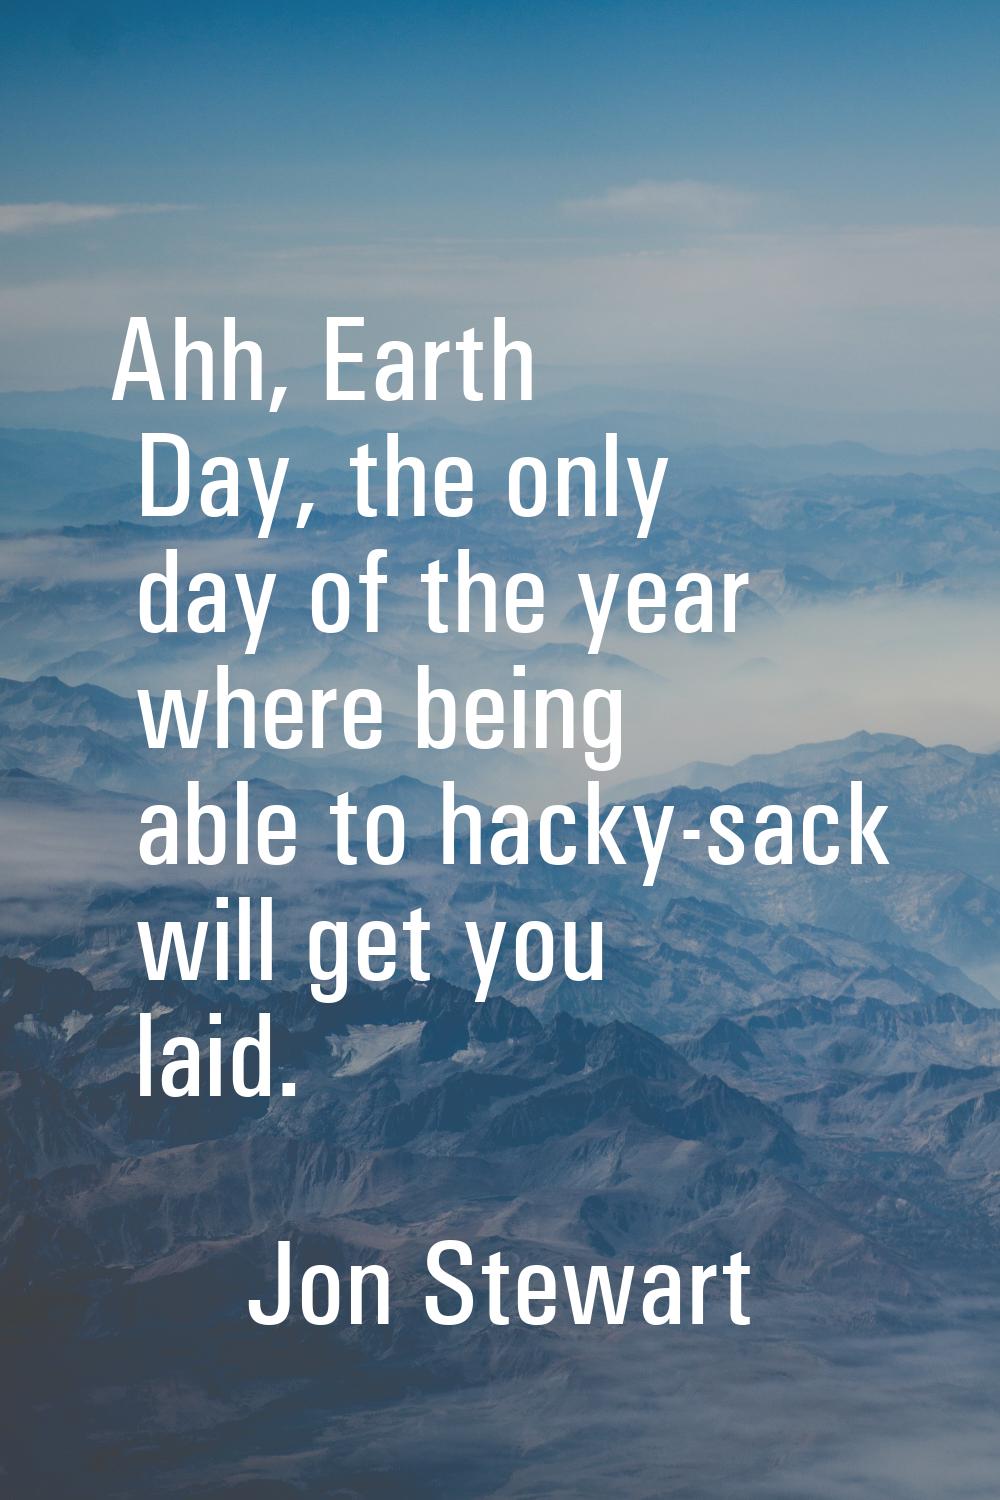 Ahh, Earth Day, the only day of the year where being able to hacky-sack will get you laid.